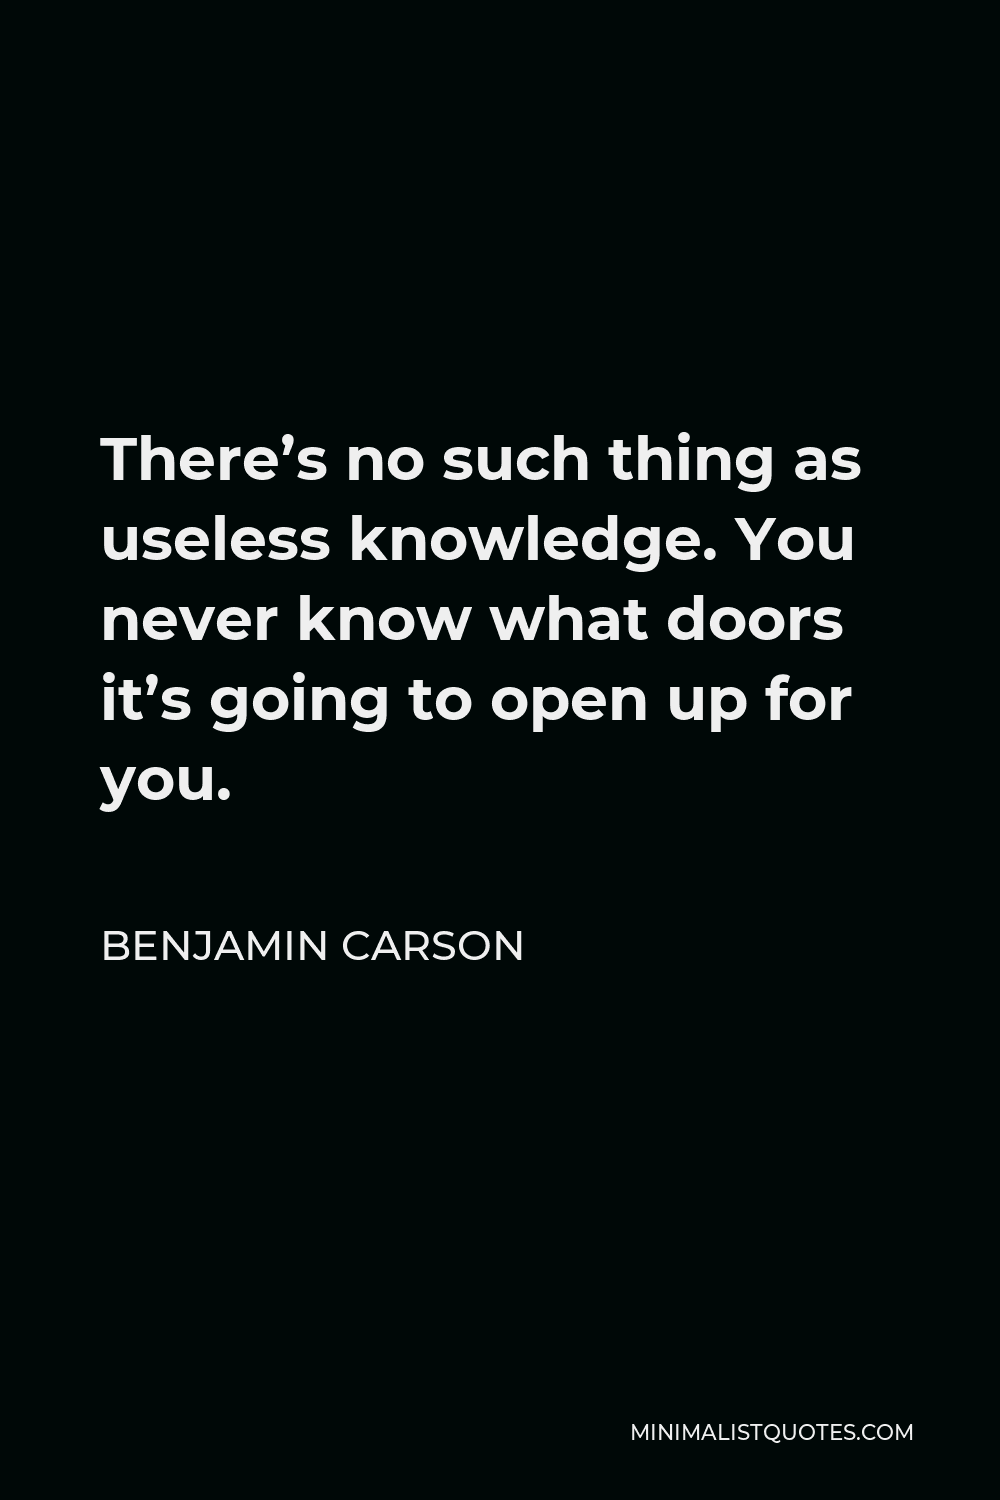 Benjamin Carson Quote - There’s no such thing as useless knowledge. You never know what doors it’s going to open up for you.